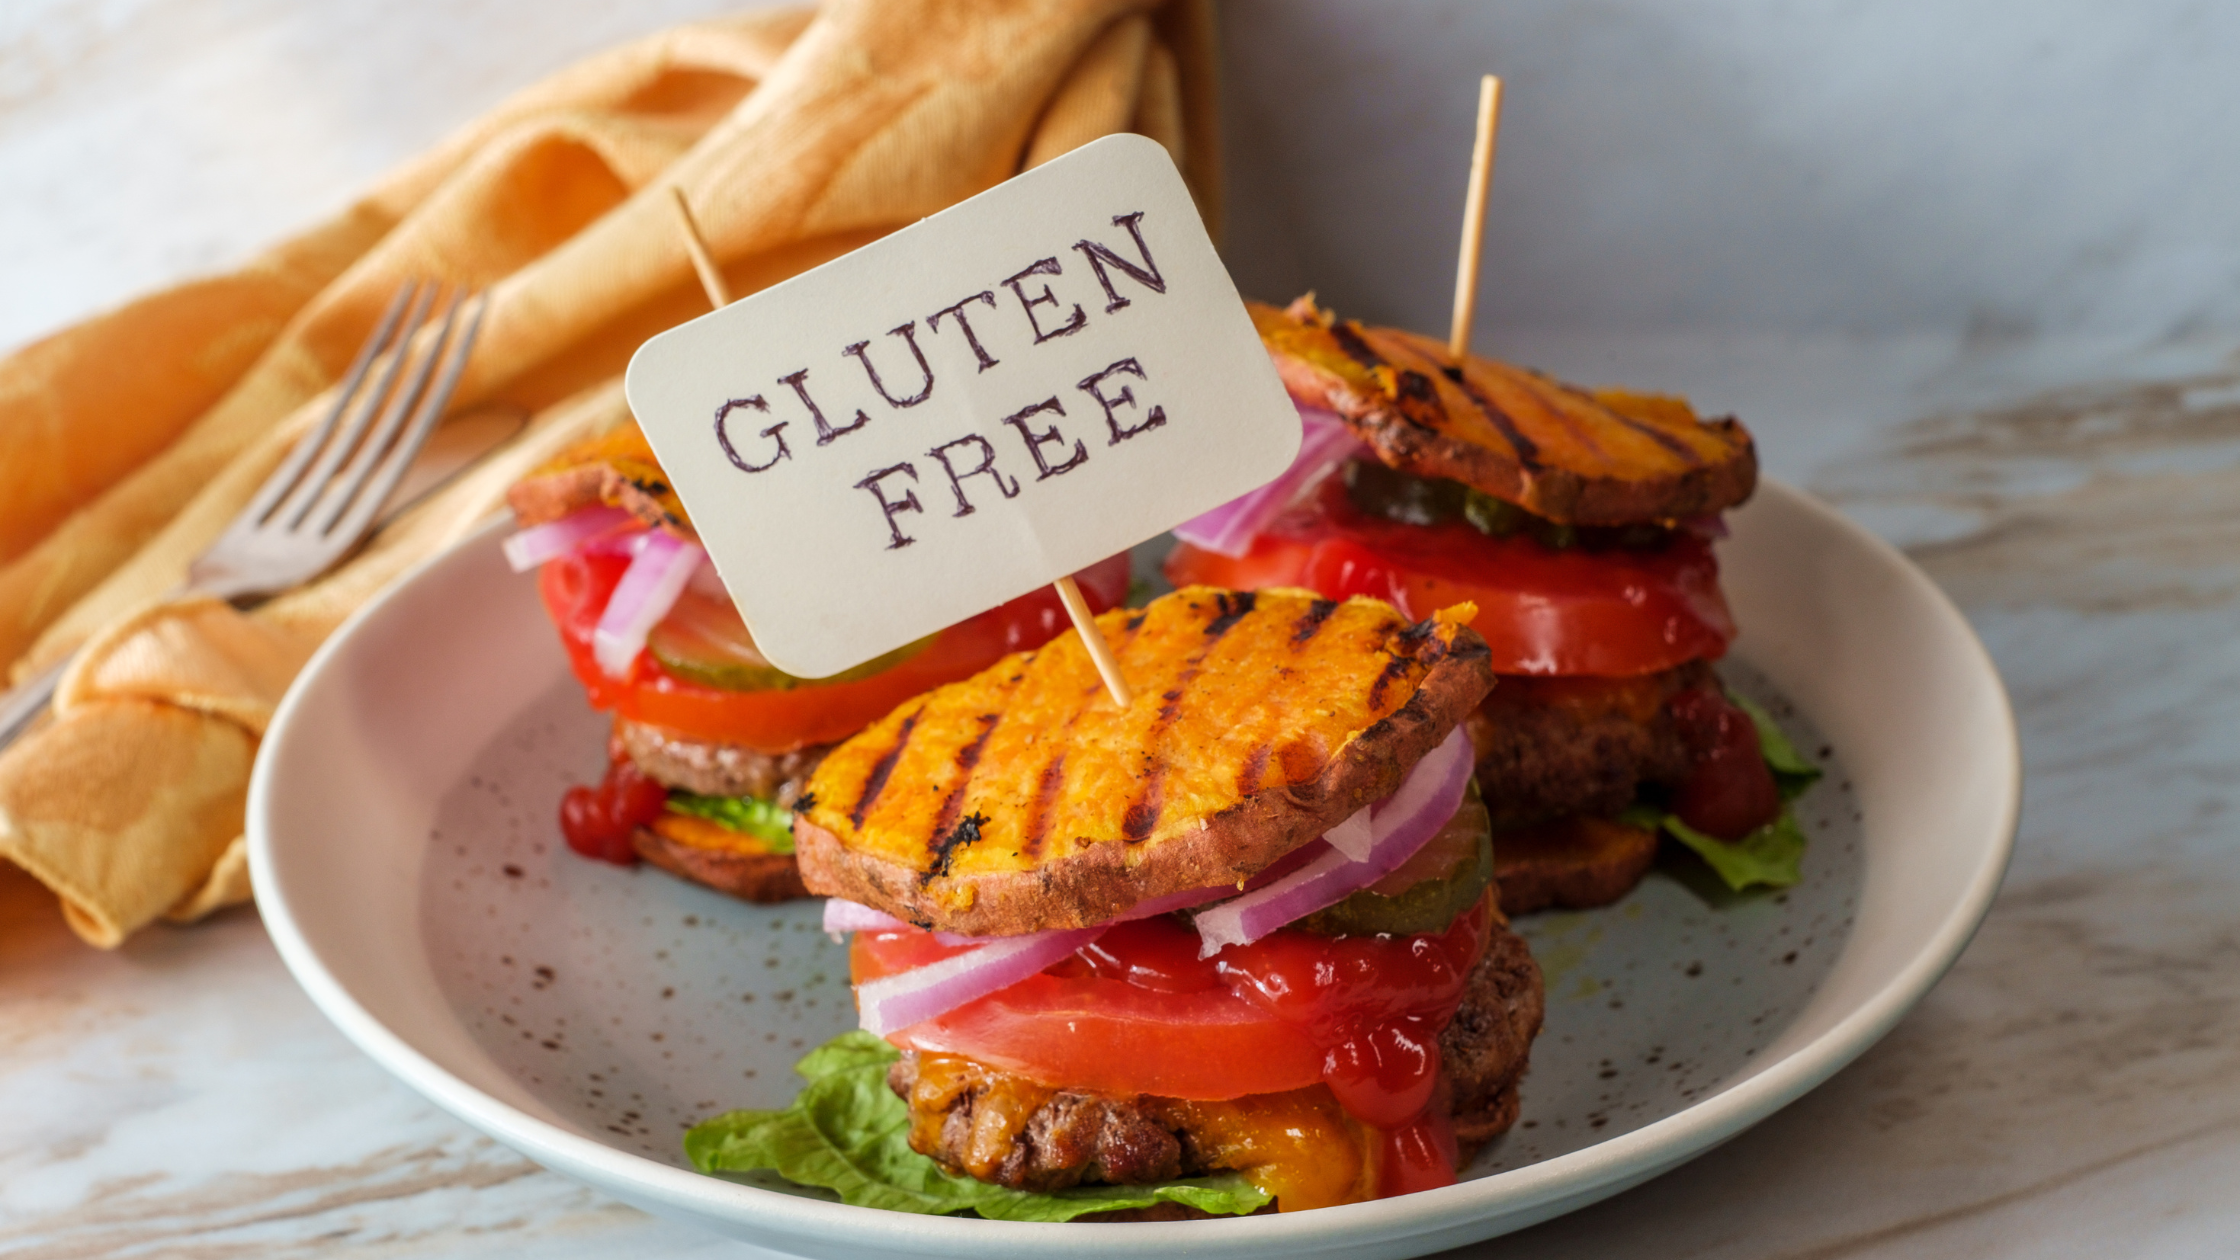 burgers on a plate with a sign that says "gluten free"